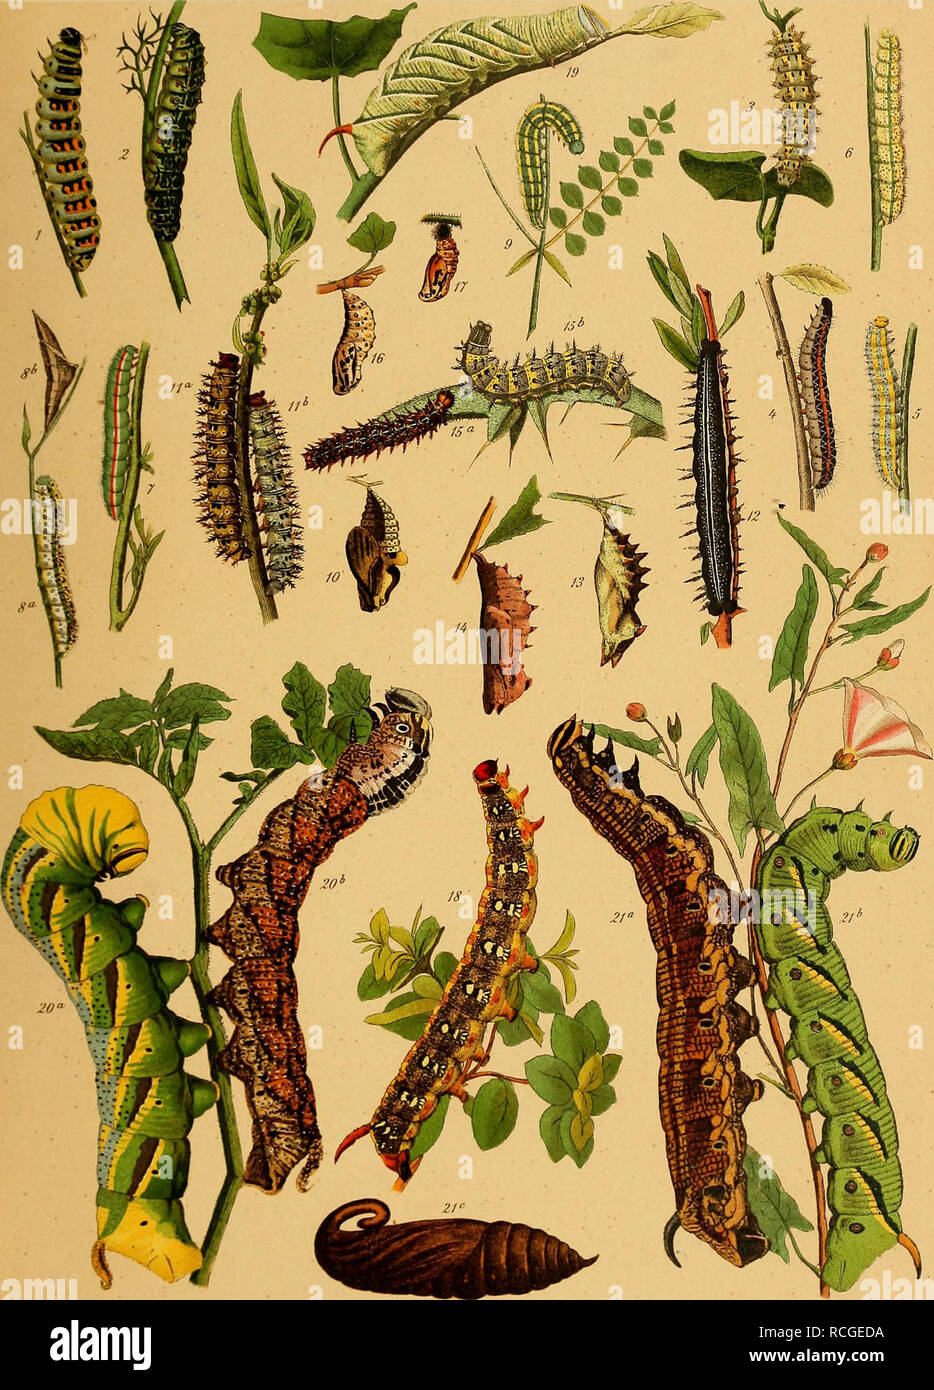 . Die Raupen der gross-schmetterlinge Europas. Butterflies; Insects. 6. Rhopalocera und Heterocera.. 1. Alexanor. 2. Hospiton. 3. Rumina. 4. Crataegi. 5. Daplidice. 6. Belia. 7. Tagis. 8. Euphenoides. 9. Hyale. 10. Populi 11. a. b. Egea. 12. Xantomelas. 13. Jo. 14. Antiopa. 15. a. b. Cardui. 16. Maturna. 17. Aurinia. 18. Dahlii. 19. Tremulae. 20. a. b. Atropos. 21. a. b. c. Convolvuli. Llh »n)t v M S«sj*r.Slutt6ai. Please note that these images are extracted from scanned page images that may have been digitally enhanced for readability - coloration and appearance of these illustrations may not Stock Photo